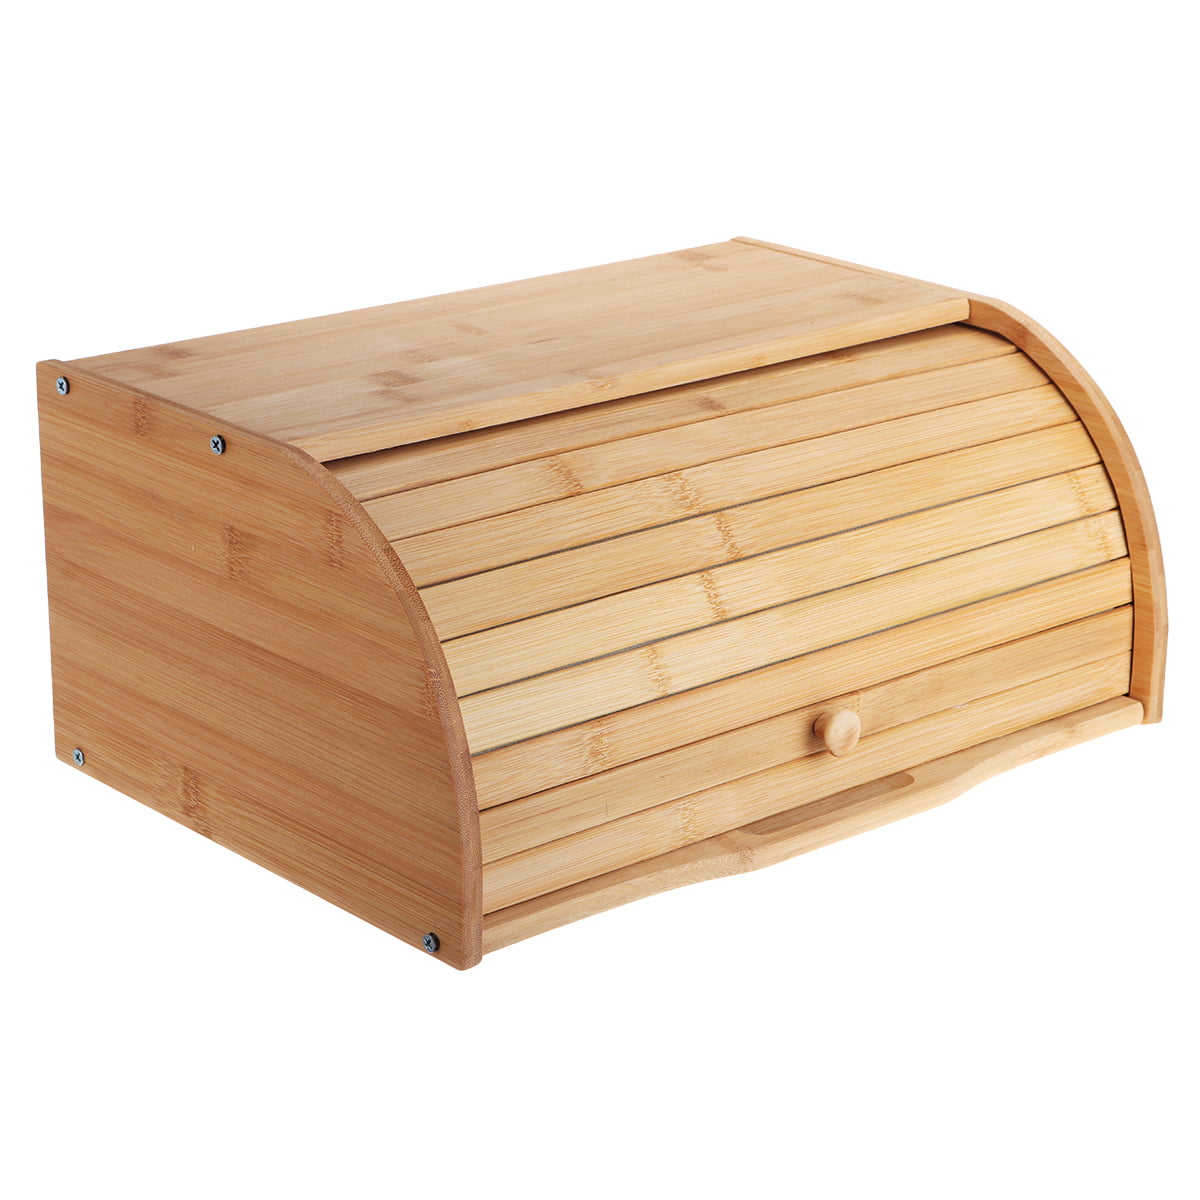 Details about   Roll Top Bamboo Wood Bread Box Loaf Container Kitchen Food Storage Bin Large US 